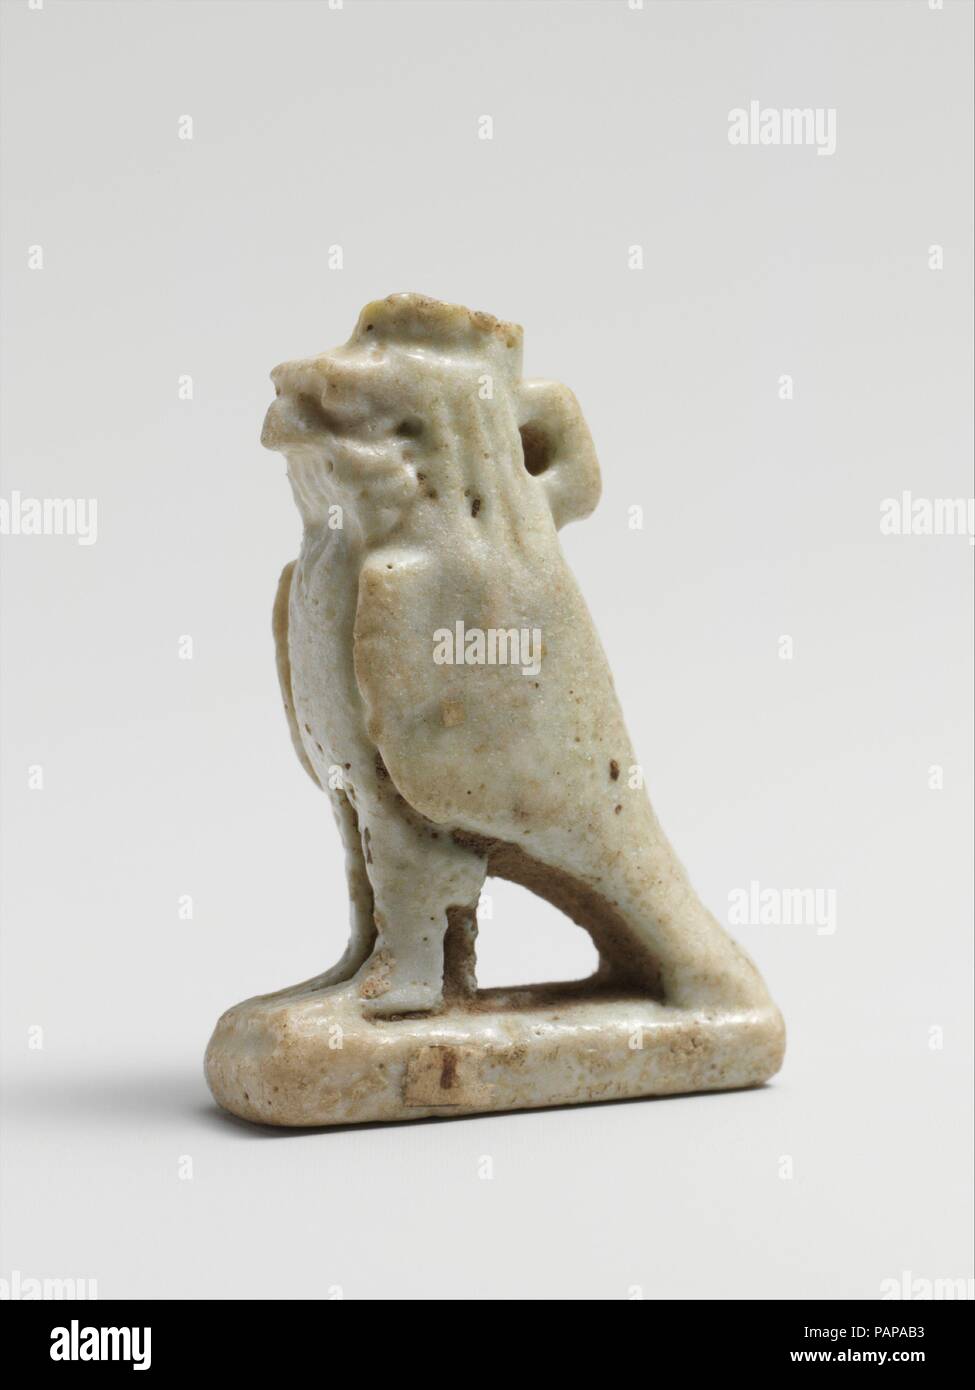 Faience amulet of Ra Horakhty. Culture: Egyptian. Dimensions: H.: 1 1/4 in. (3.2 cm). Date: 664-30 B.C..  Amulets representing animals were attributed to a deity: a hawk for Ra, the Sun God, a lion for Sakhmi, the War Goddess, a ram for Khnum and a cat for Bast. Museum: Metropolitan Museum of Art, New York, USA. Stock Photo